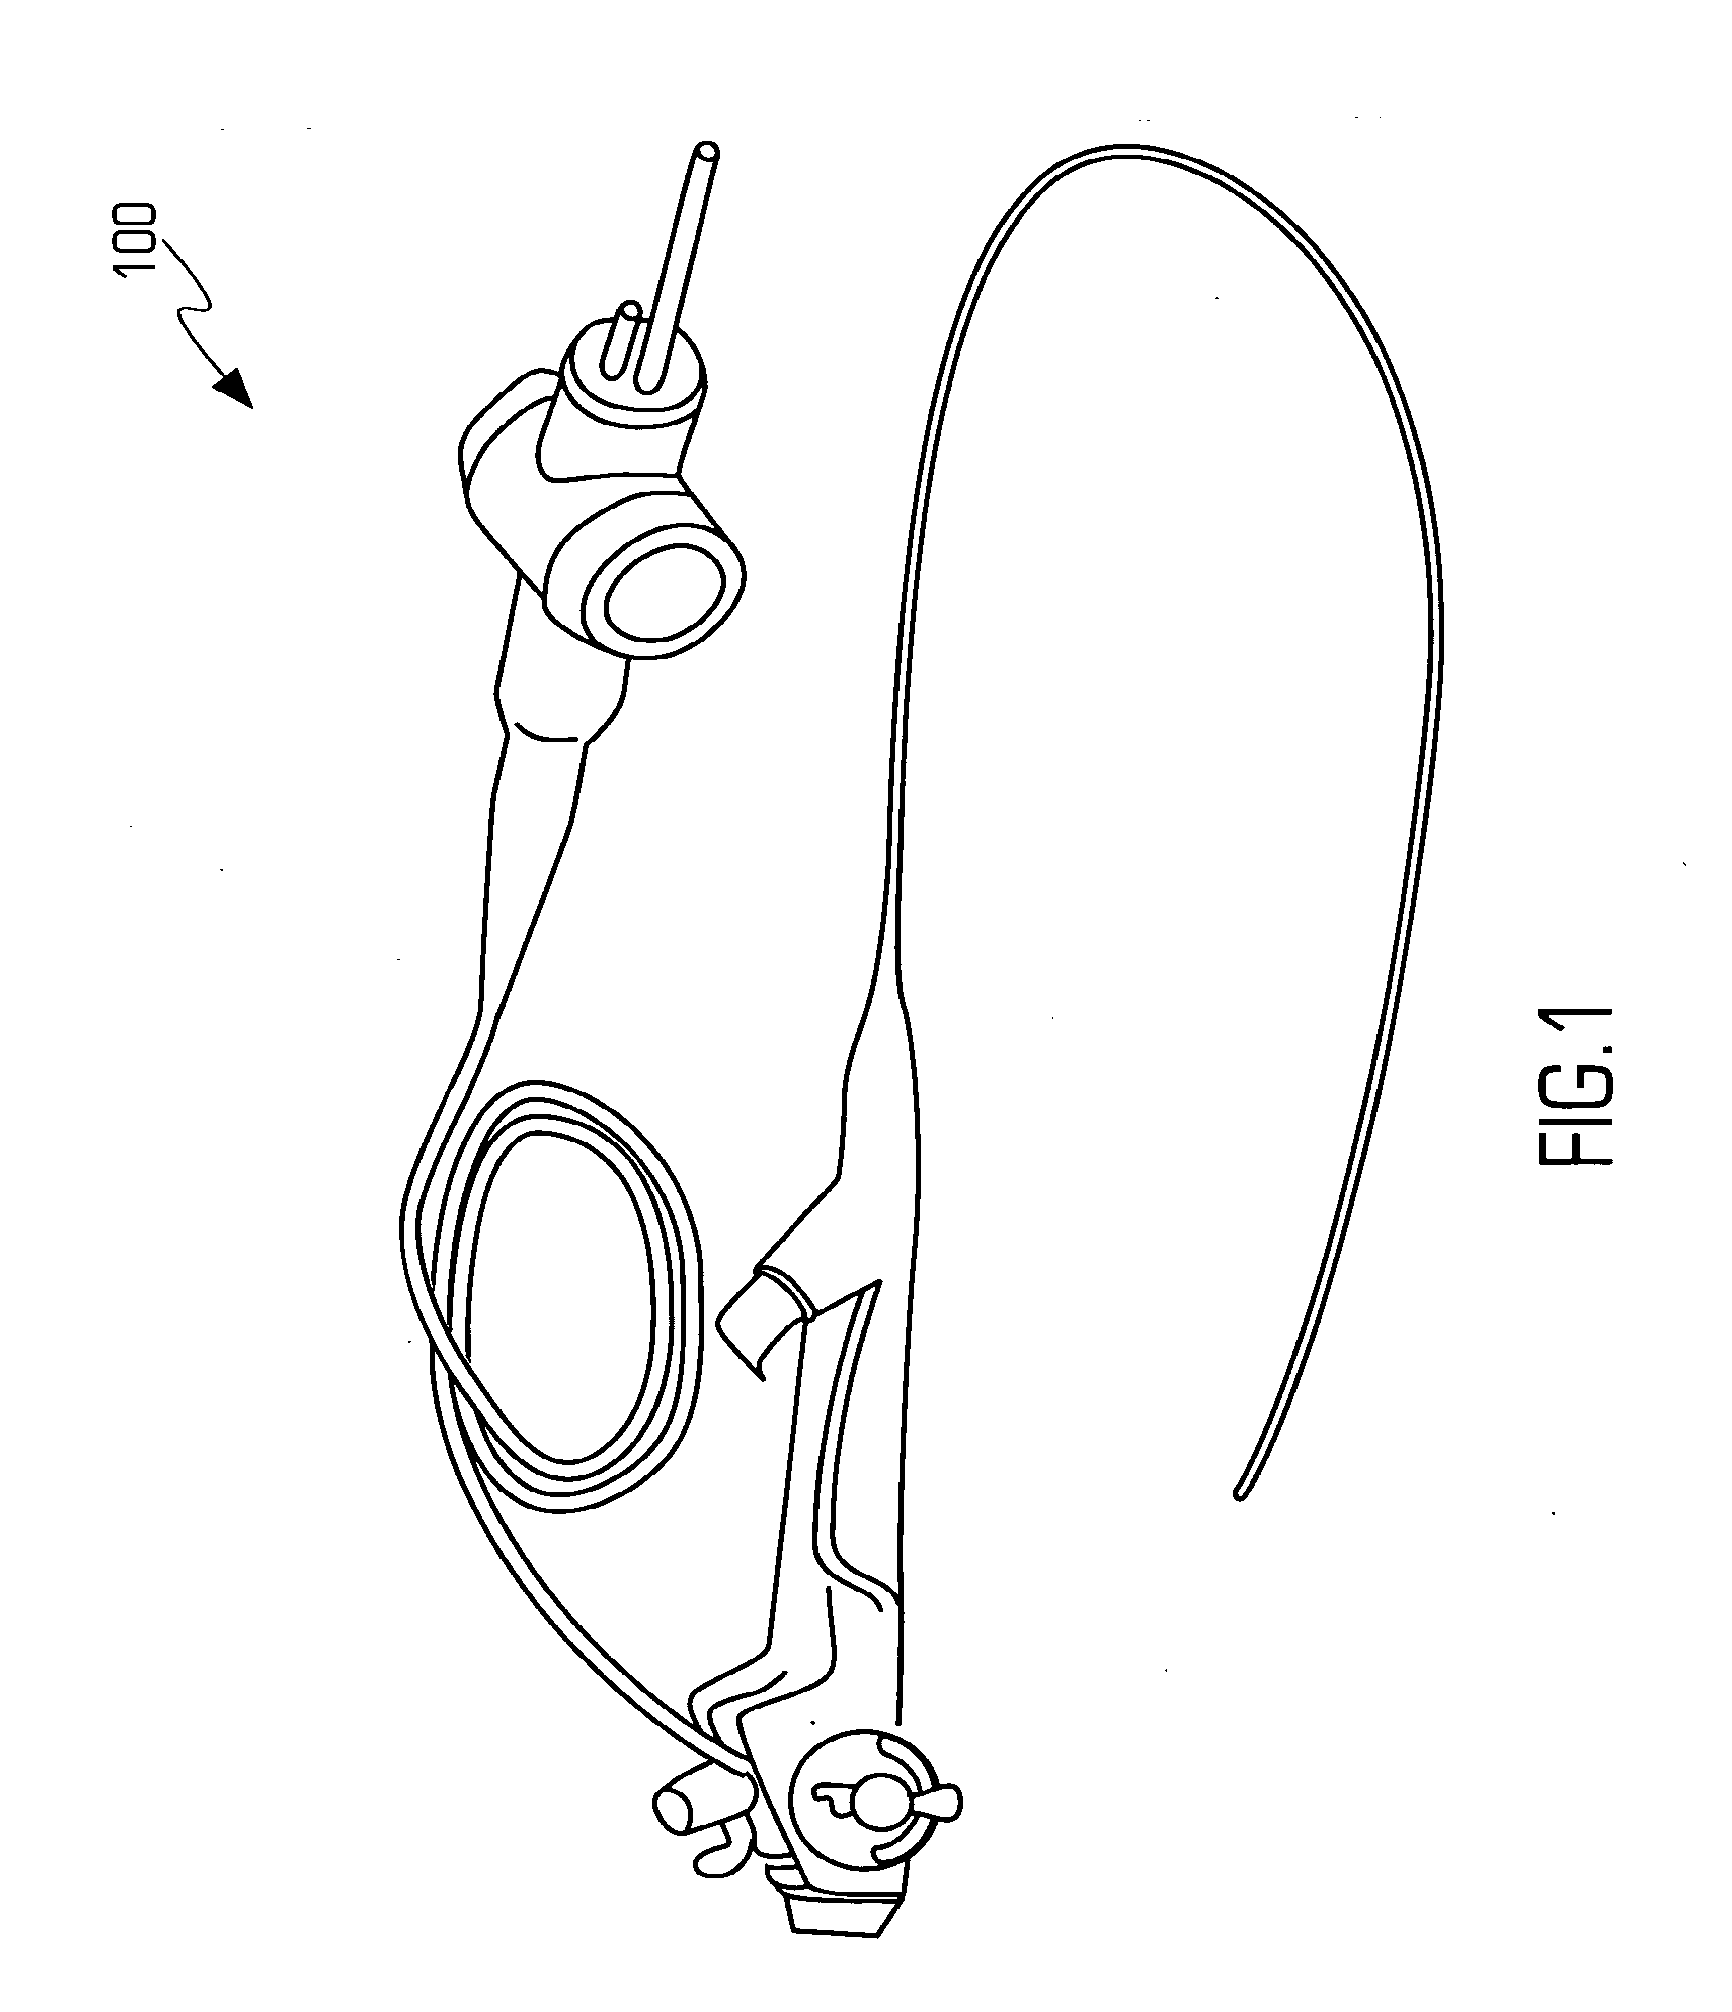 Method and apparatus for the treatment of respiratory and other infections using ultraviolet germicidal irradiation